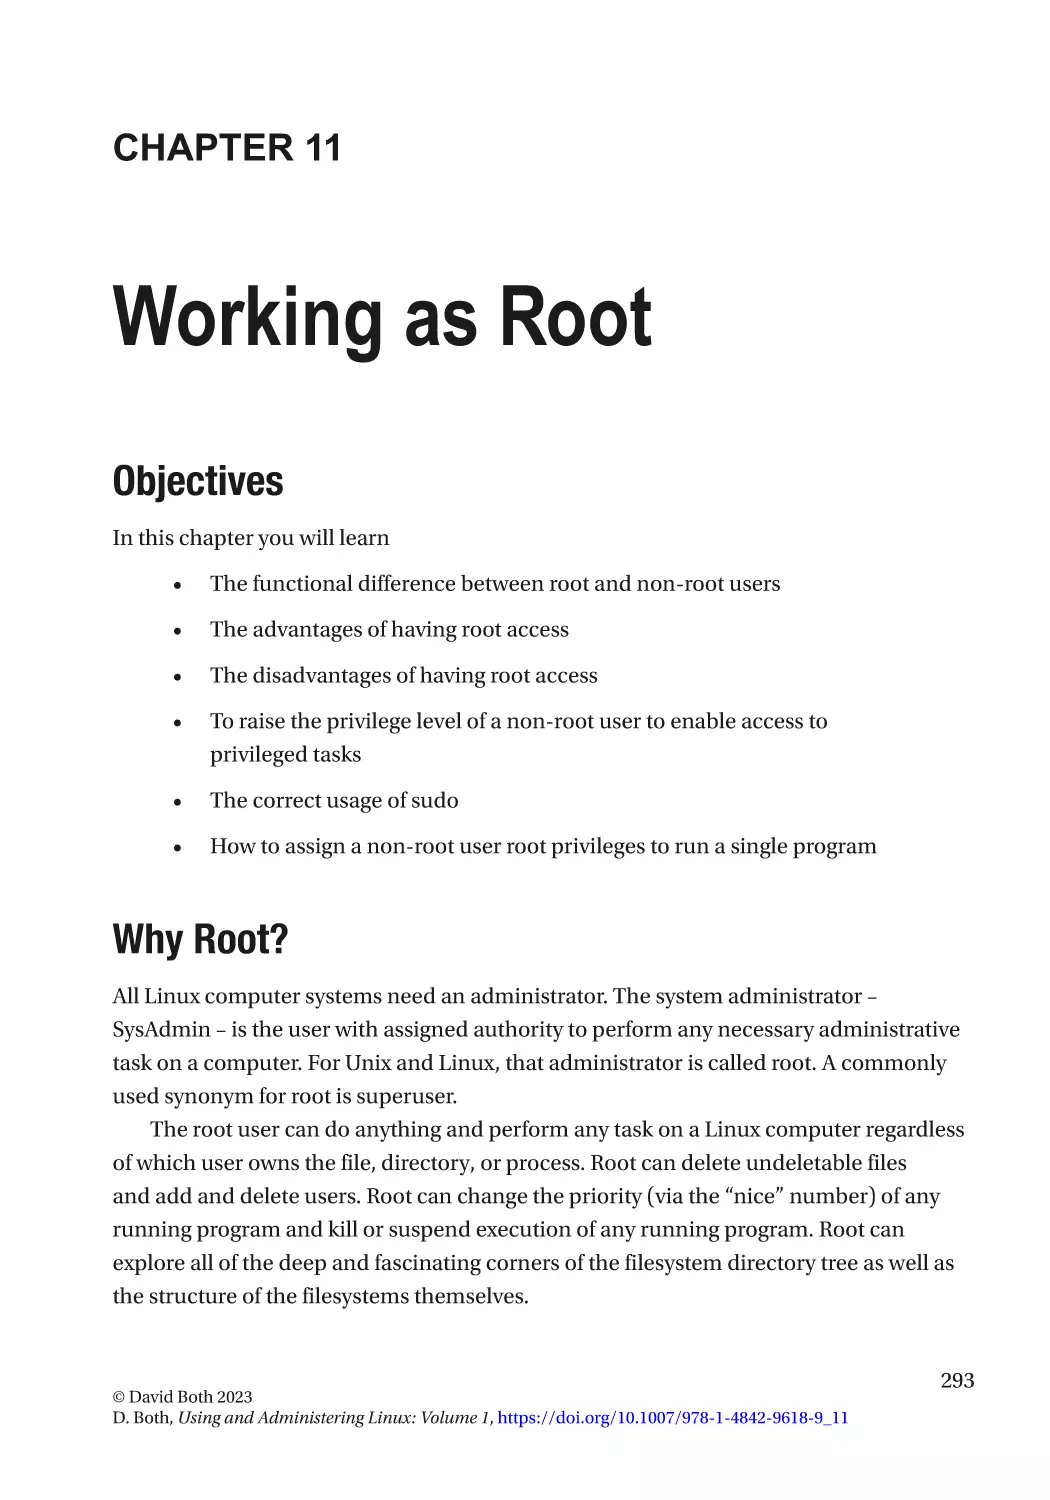 Chapter 11
Objectives
Why Root?